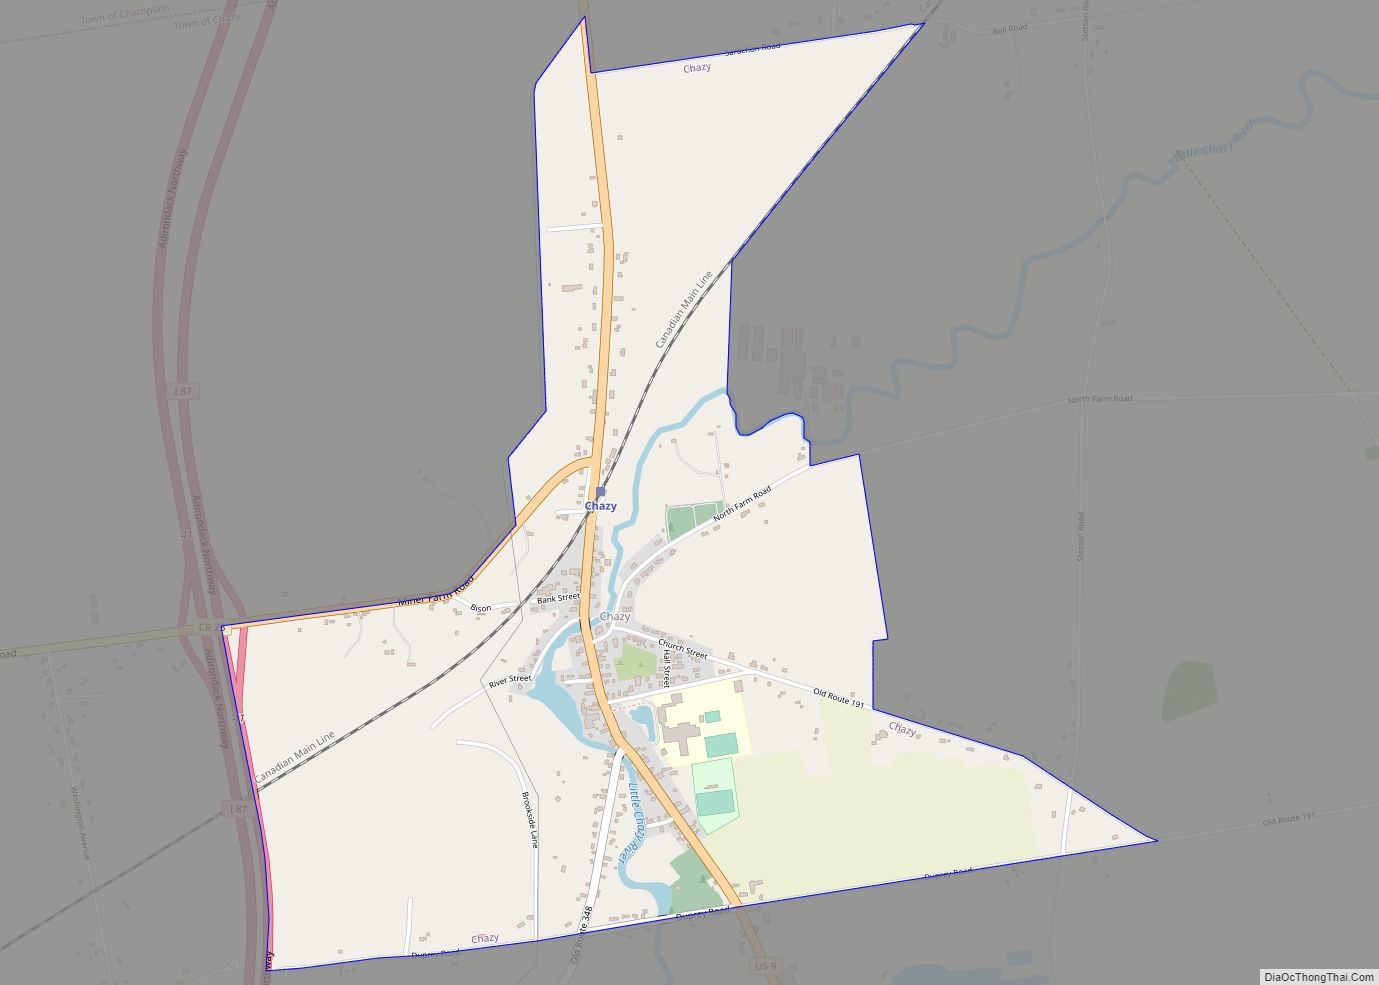 Map of Chazy CDP